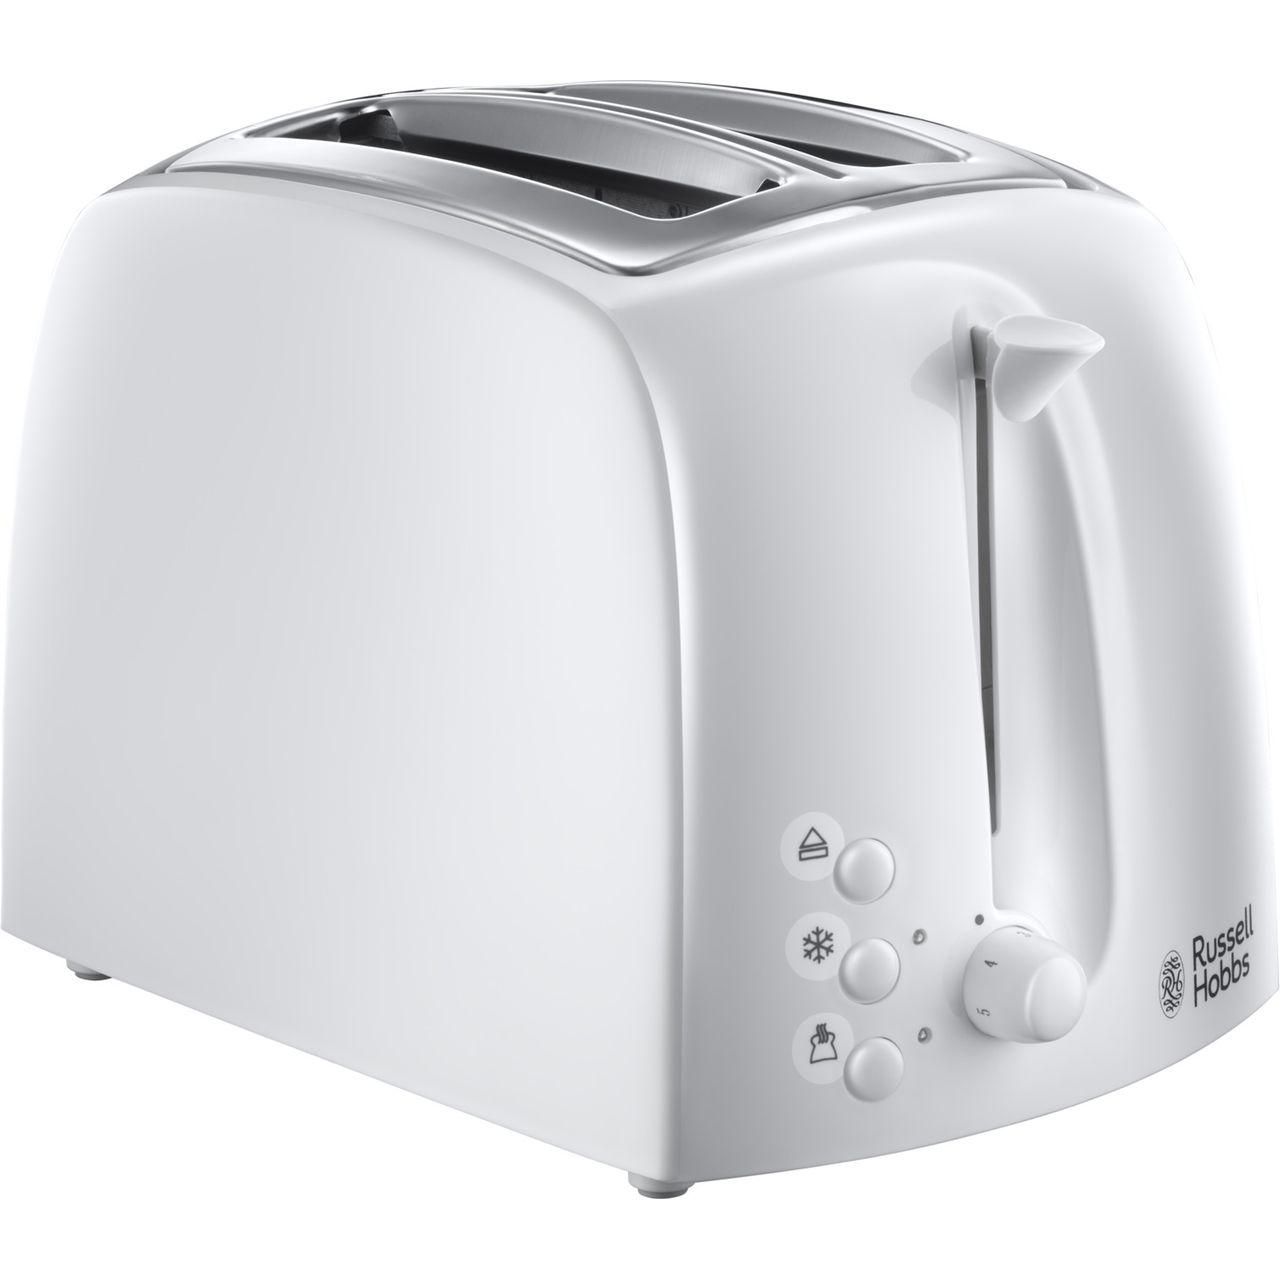 Russell Hobbs Textures 21640 2 Slice Toaster Review